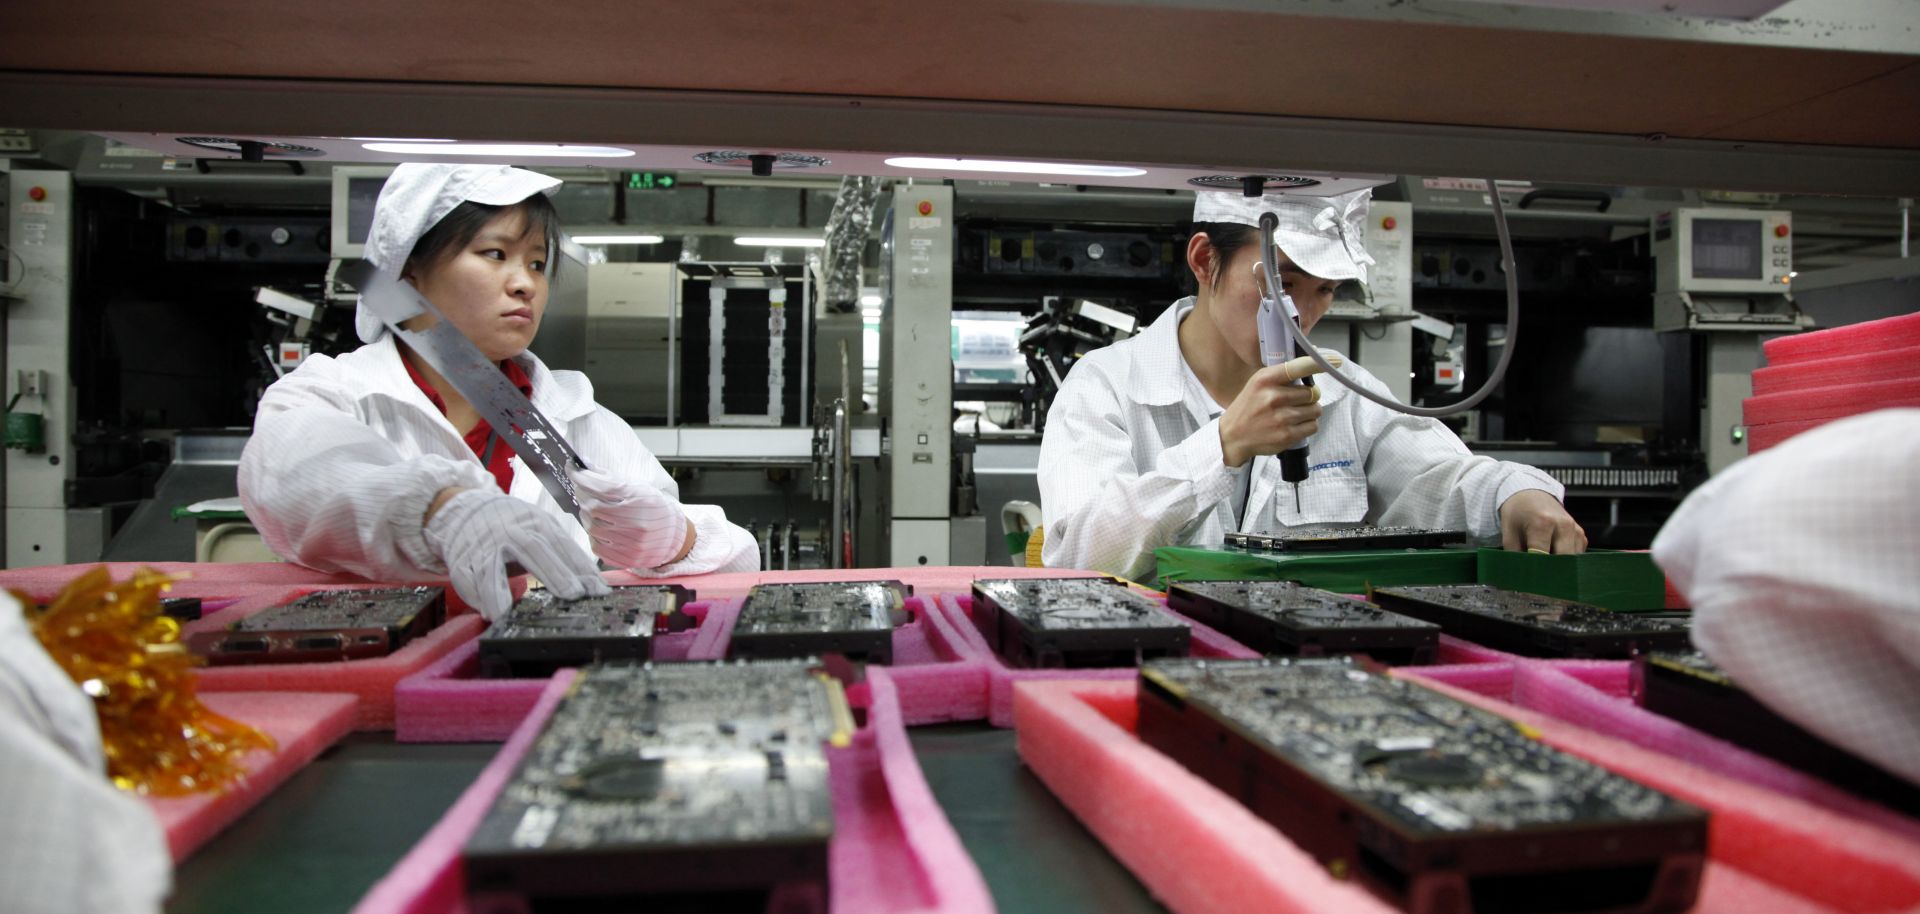 Employees work on the assembly line.